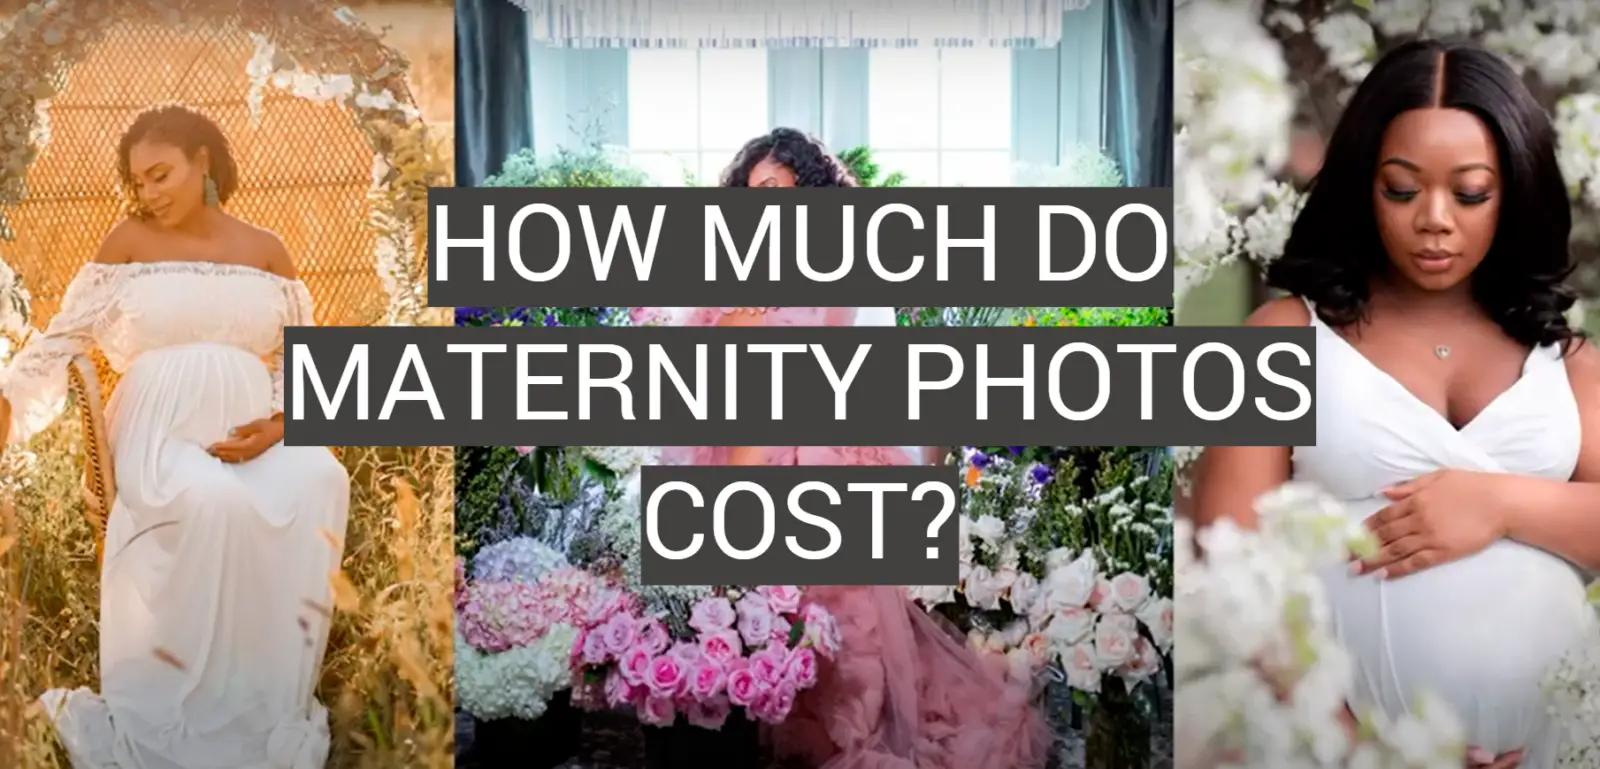 How Much Do Maternity Photos Cost?